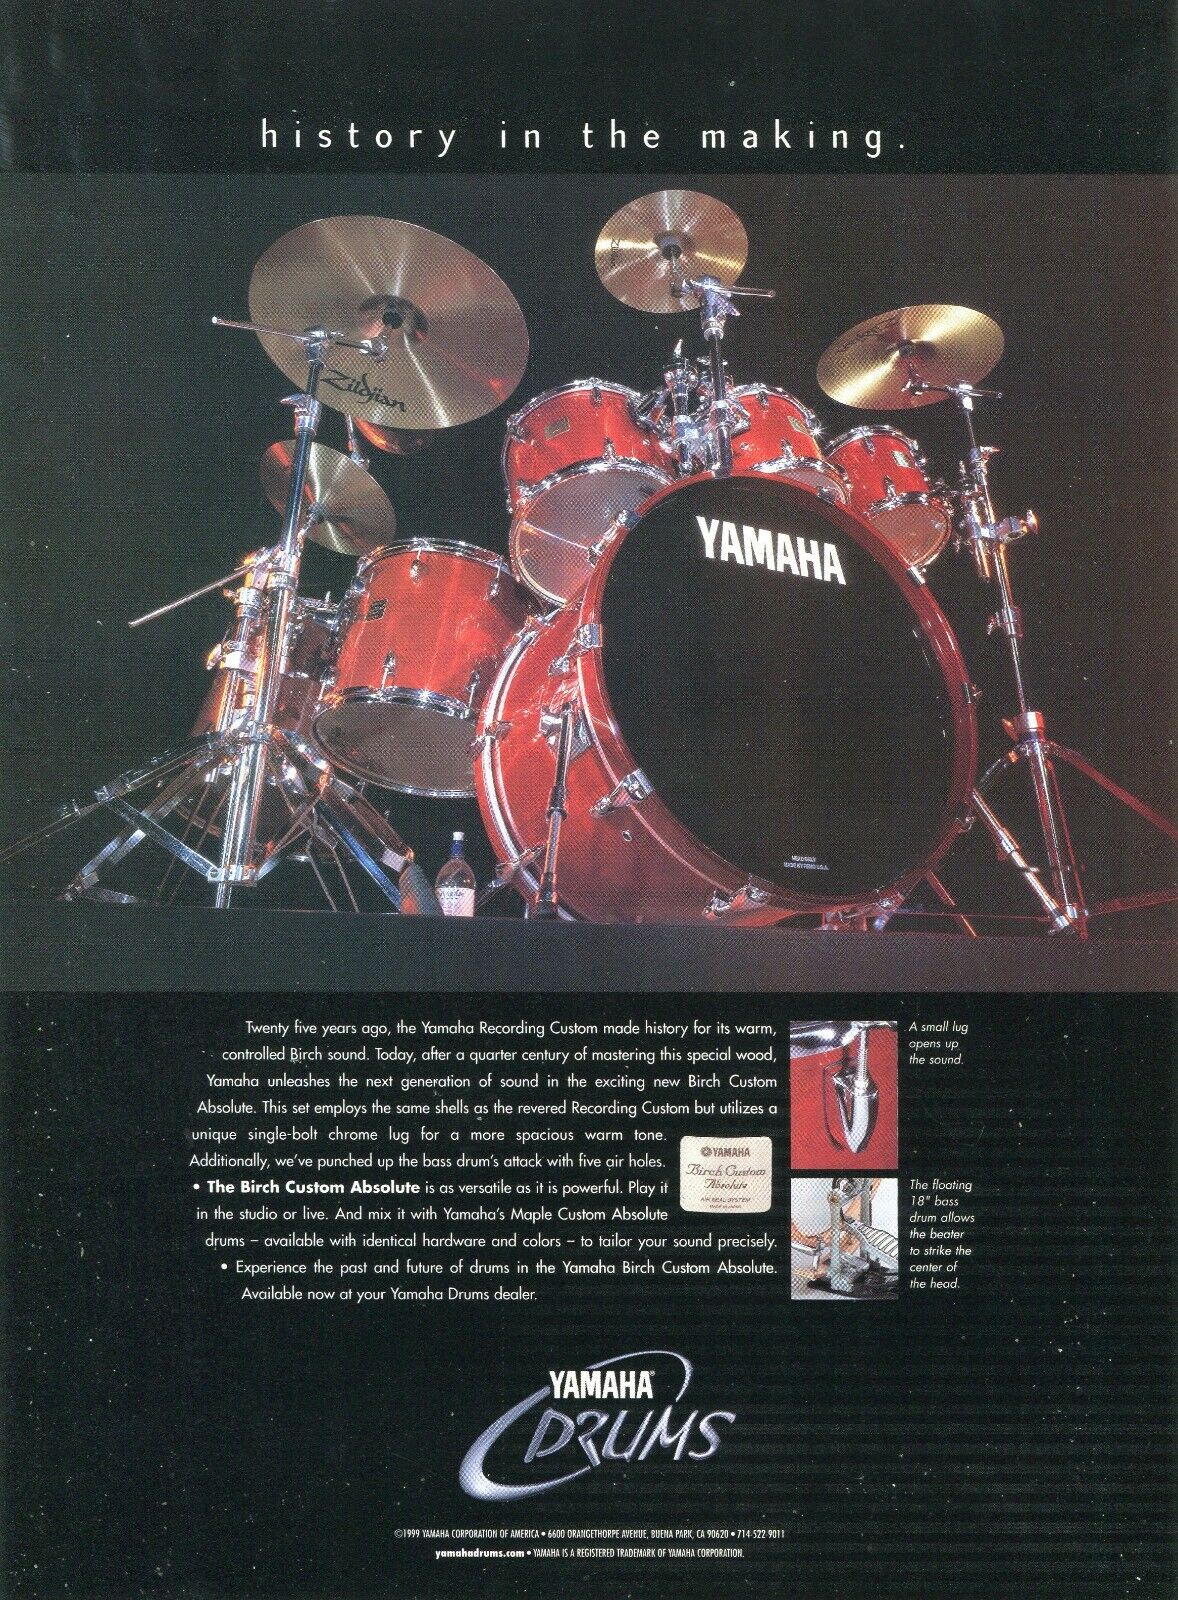 1999 Print Ad of Yamaha Birch Custom Absolute Drum Kit history in the making